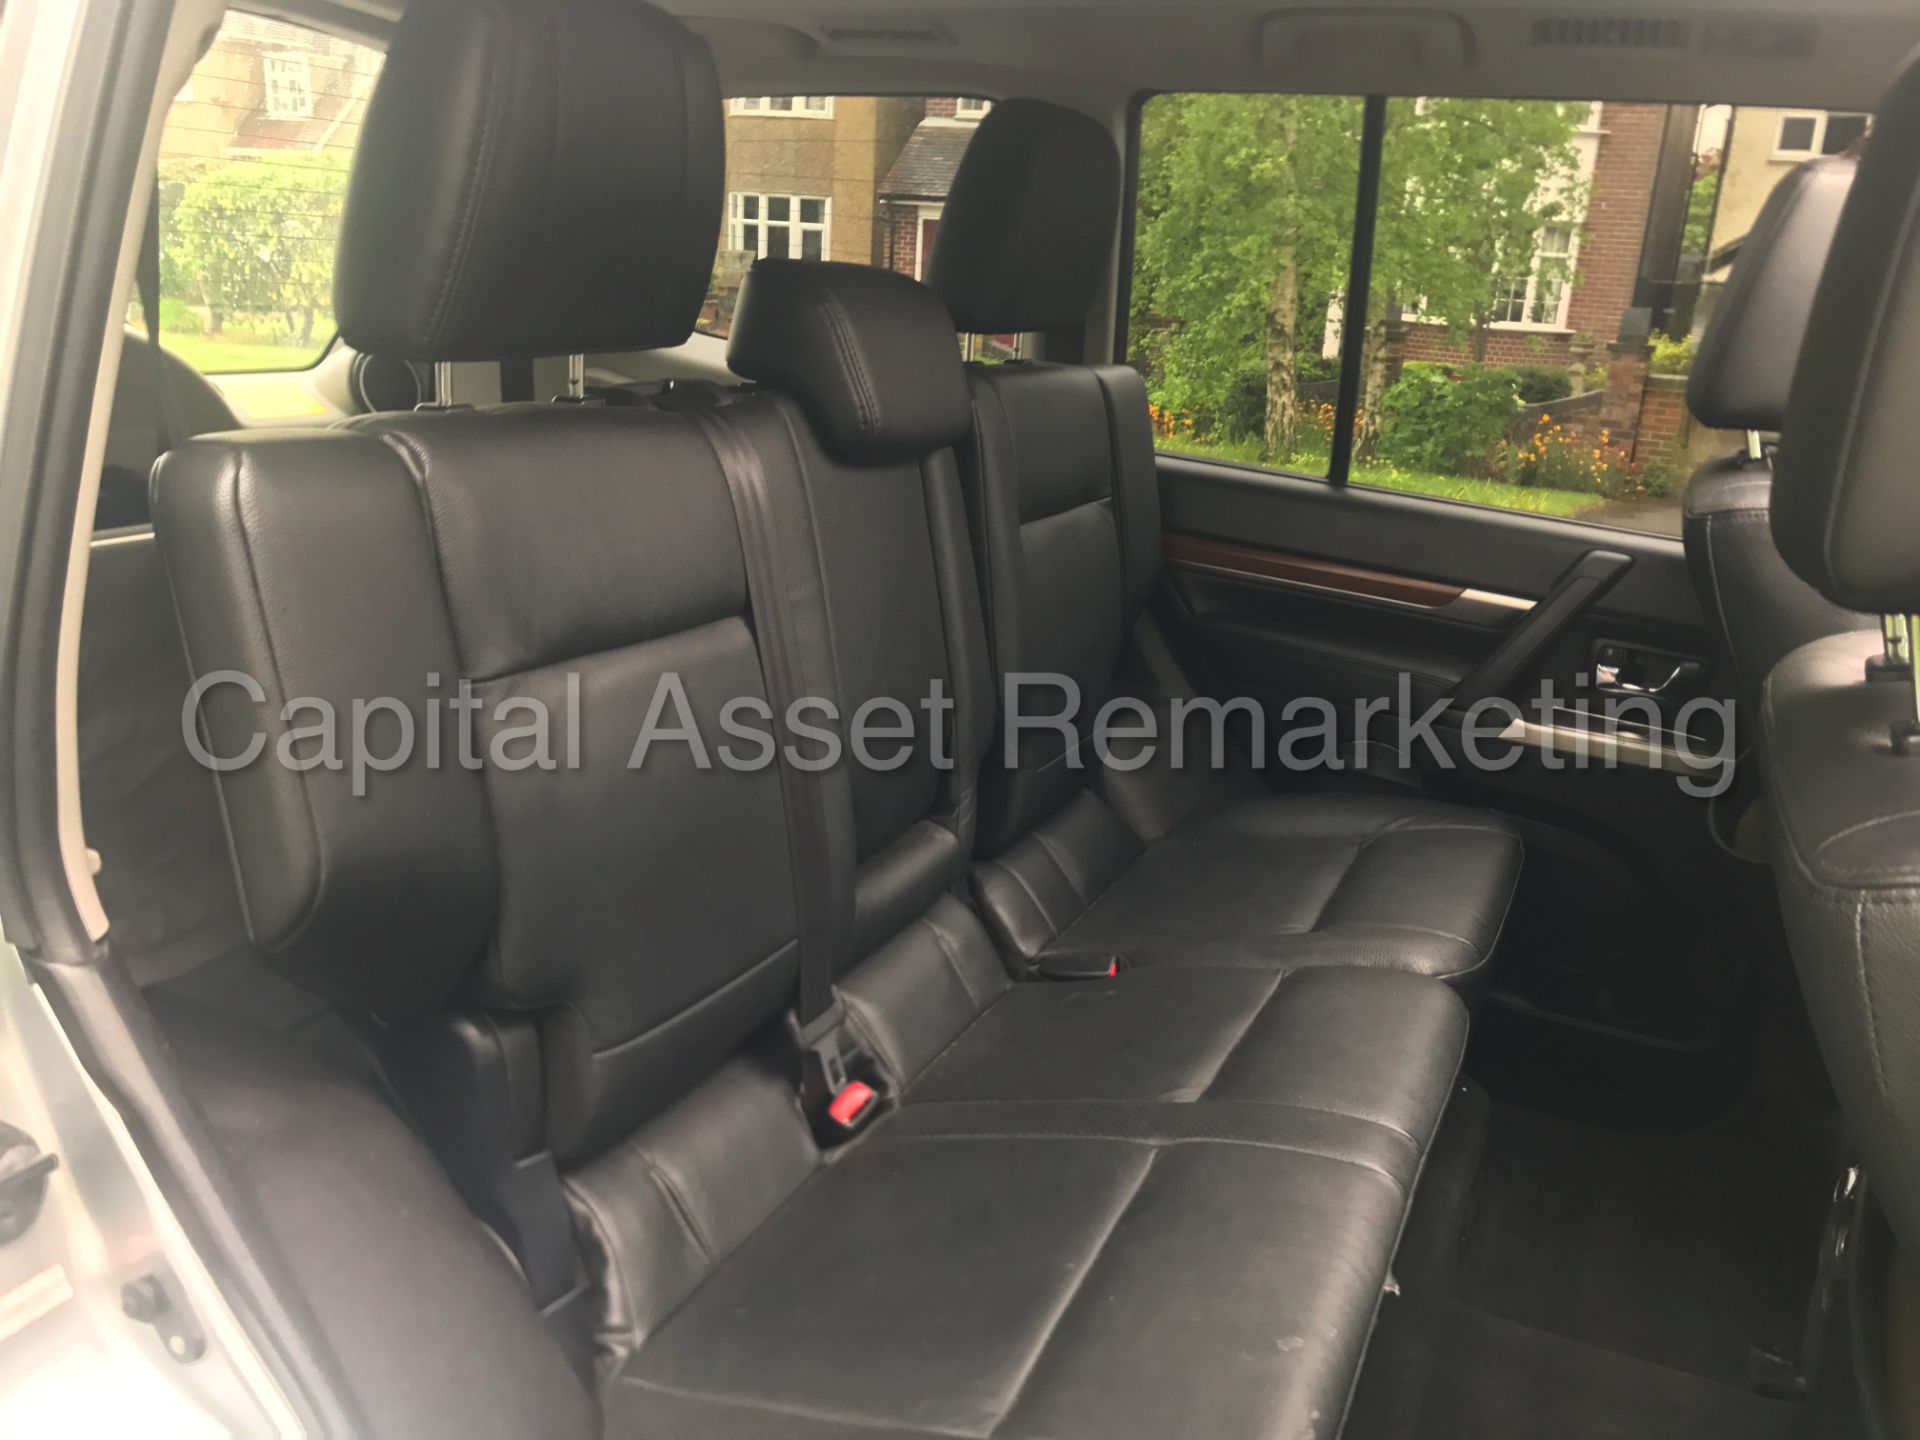 MITSUBISHI SHOGUN 'LWB - 7 SEATER' (2013) '3.2 DI-D - AUTO - LEATHER - SAT NAV' (1 OWNER FROM NEW) - Image 20 of 30